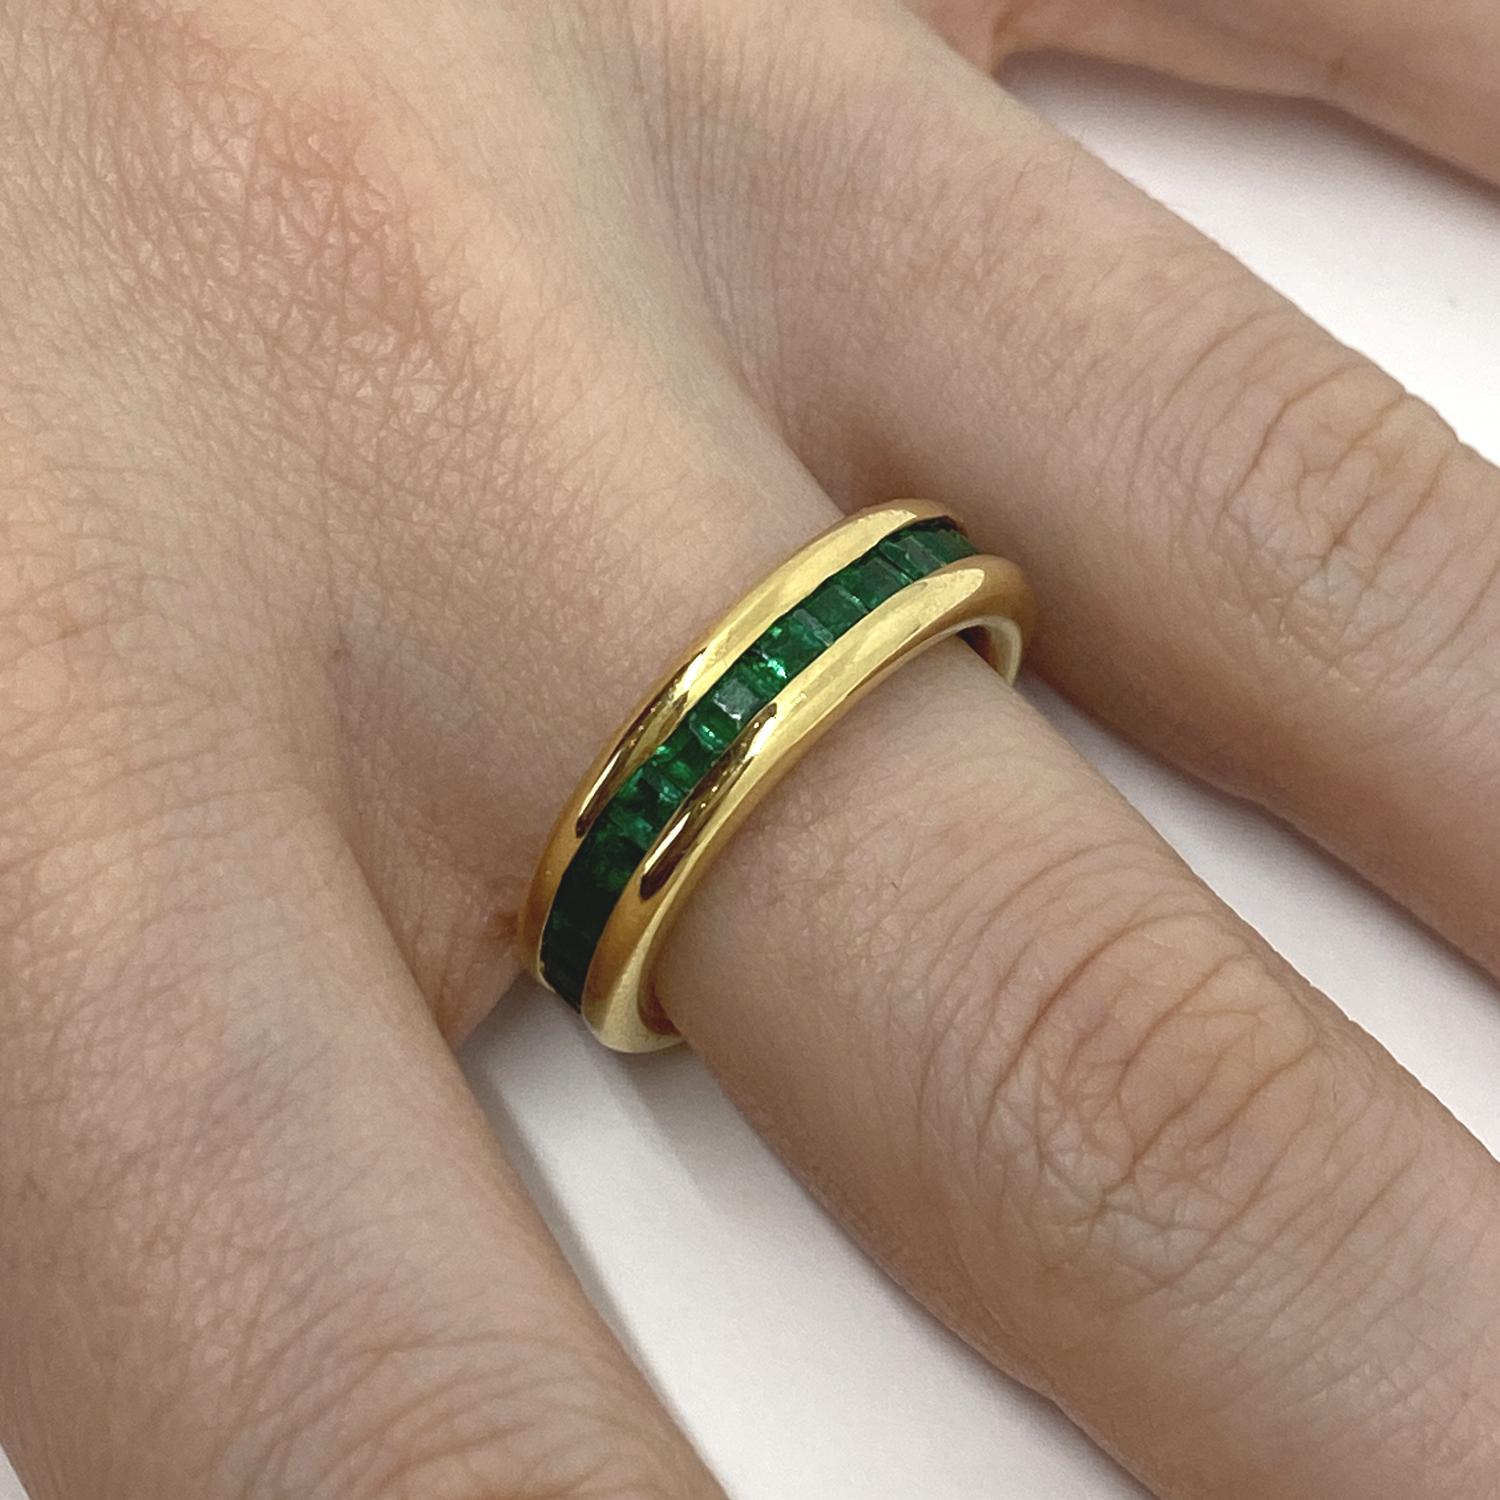 Ring riviere made of 18kt yellow gold with natural carré-cut emeralds for ct.2.44

Welcome to our jewelry collection, where every piece tells a story of timeless elegance and unparalleled craftsmanship. As a family-run business in Italy for over 100